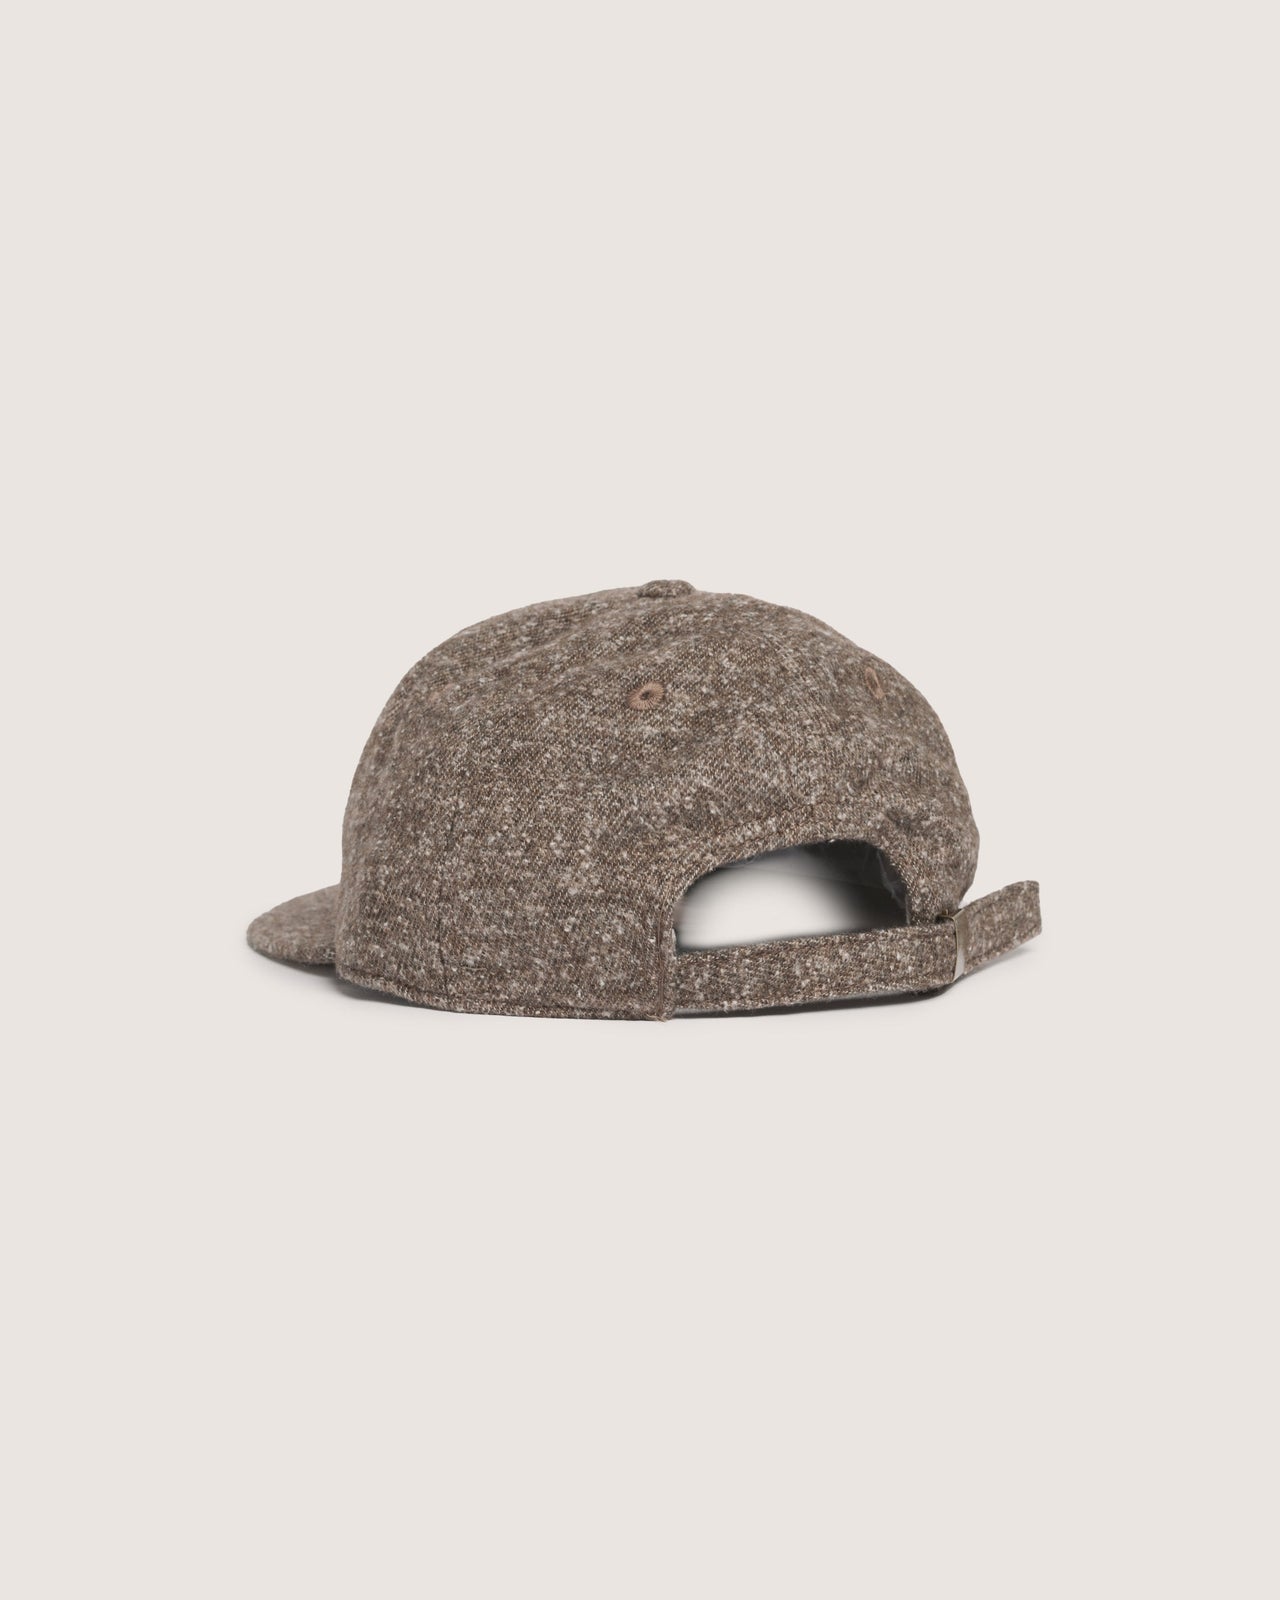 Flannel Cap - Speckled Brown